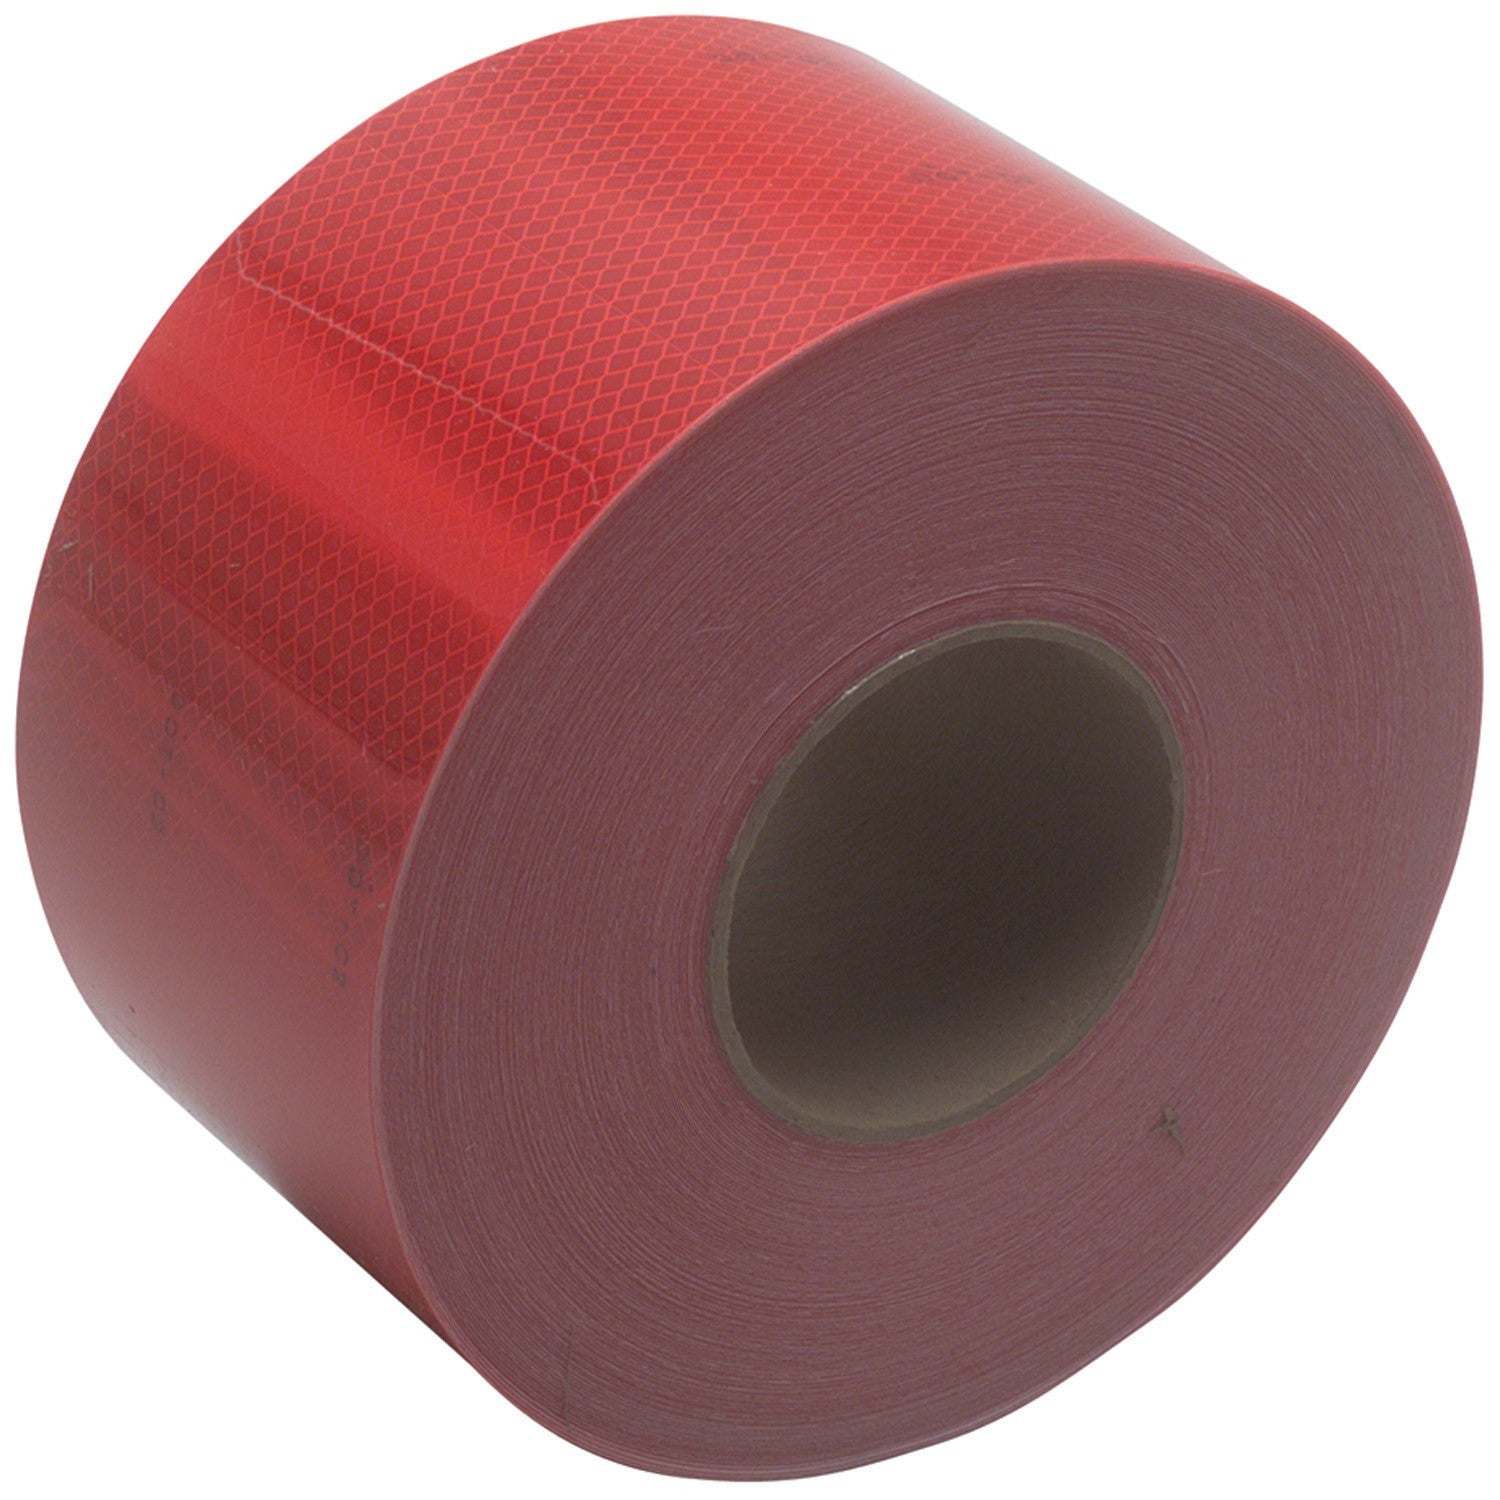 4" x 150' Roll 3M Reflective Conspicuity Tape 983-72 ES Solid Red - DOT-C2 Marking